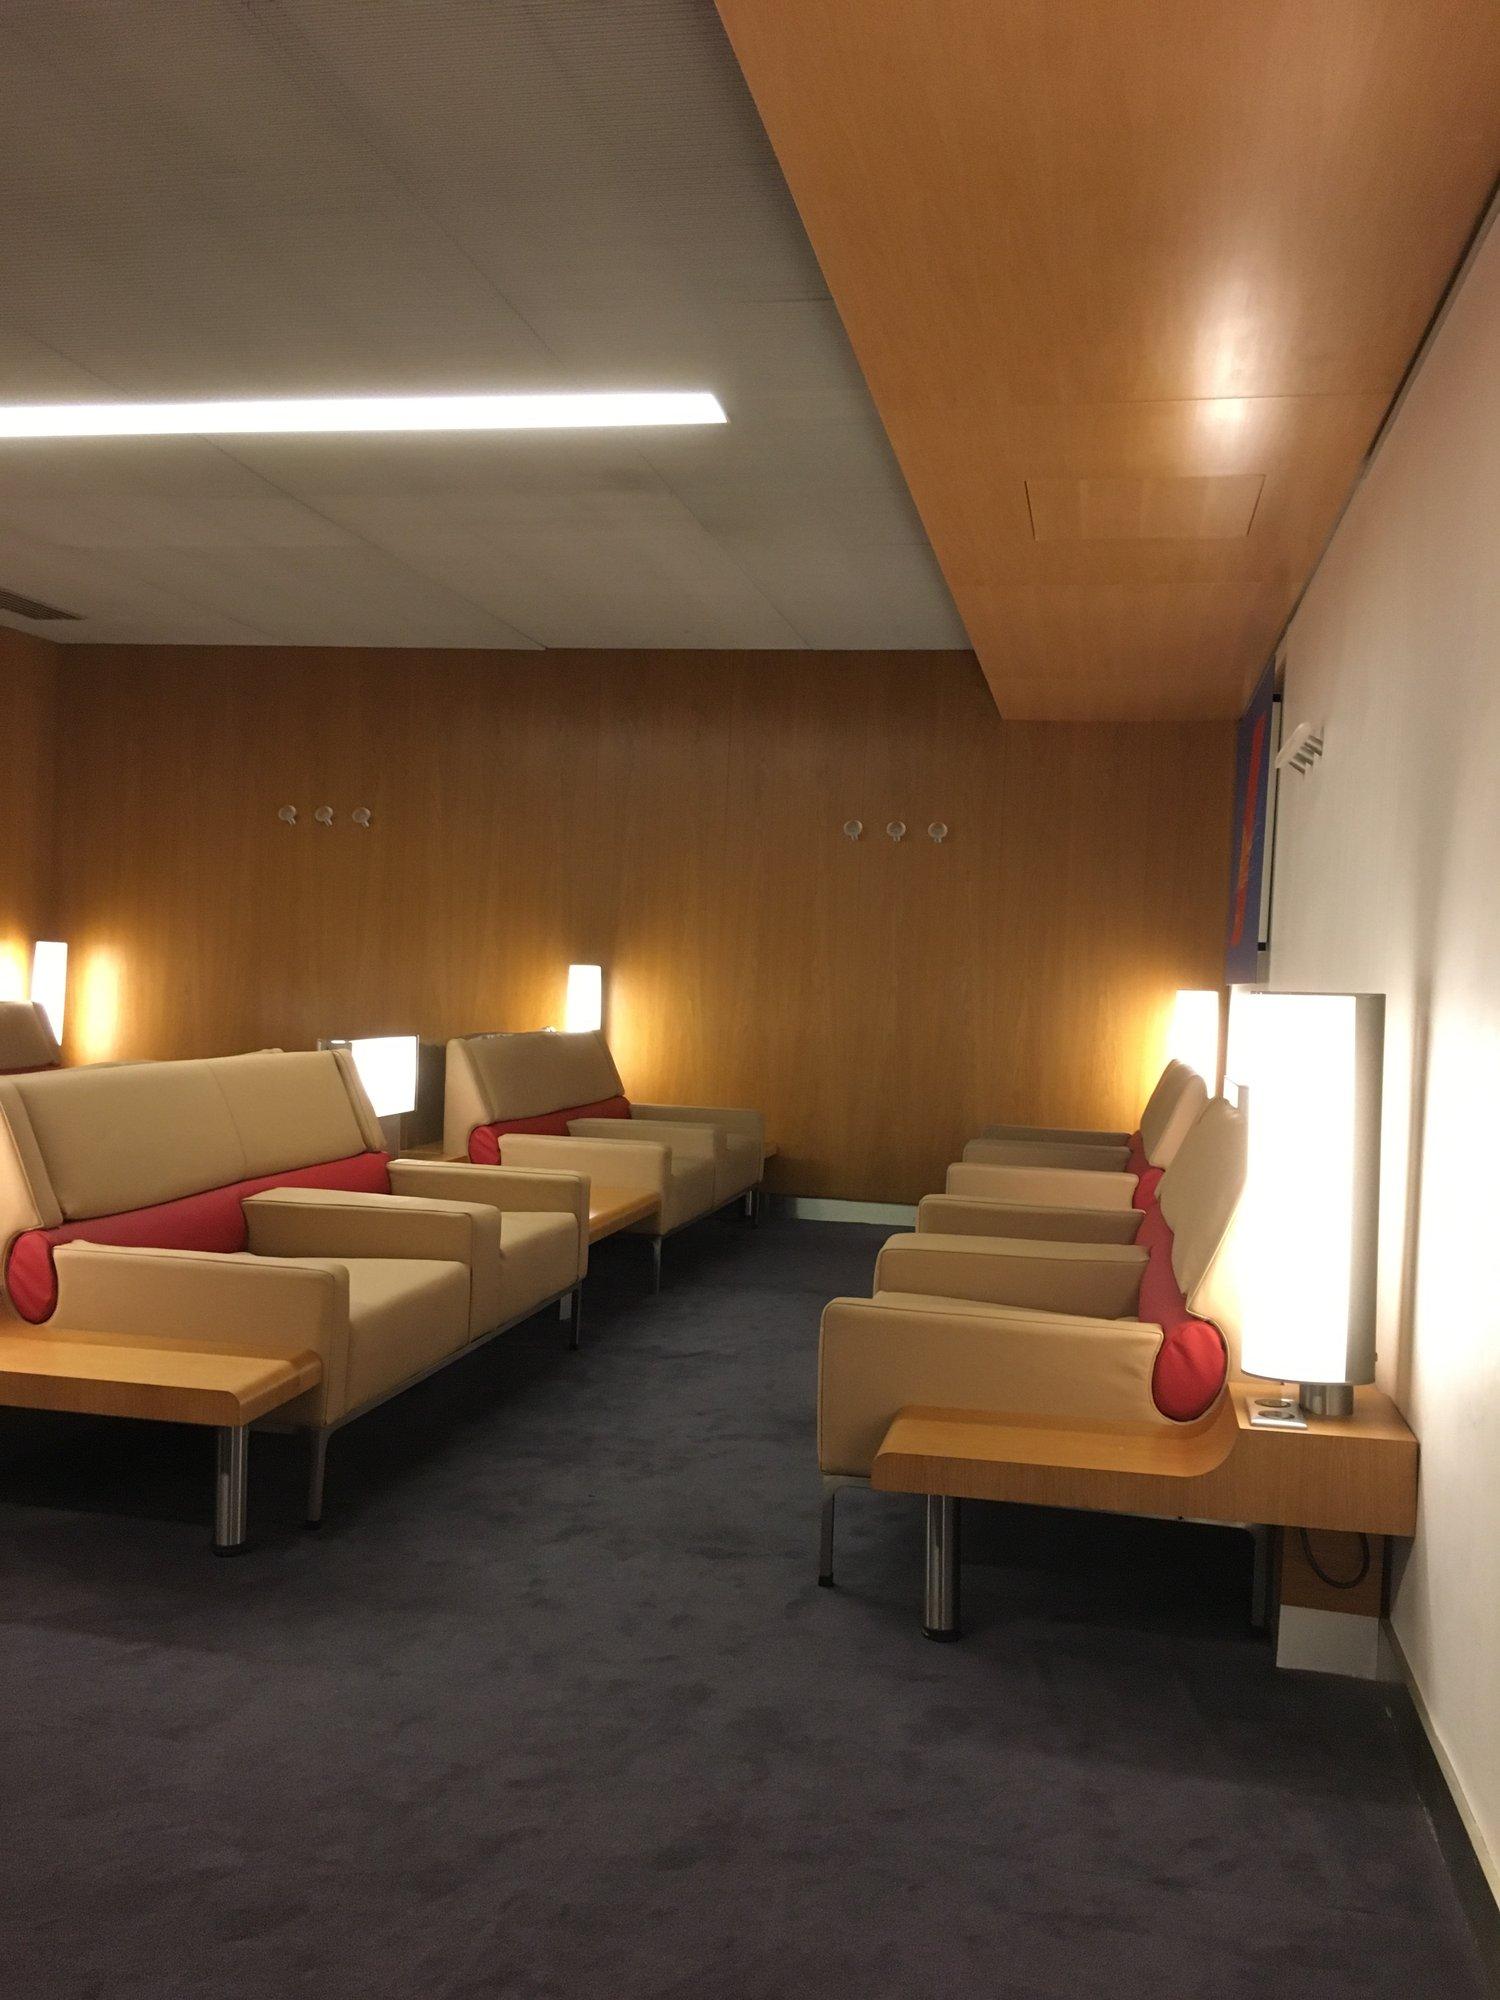 Air France Lounge (Concourse K) image 35 of 35